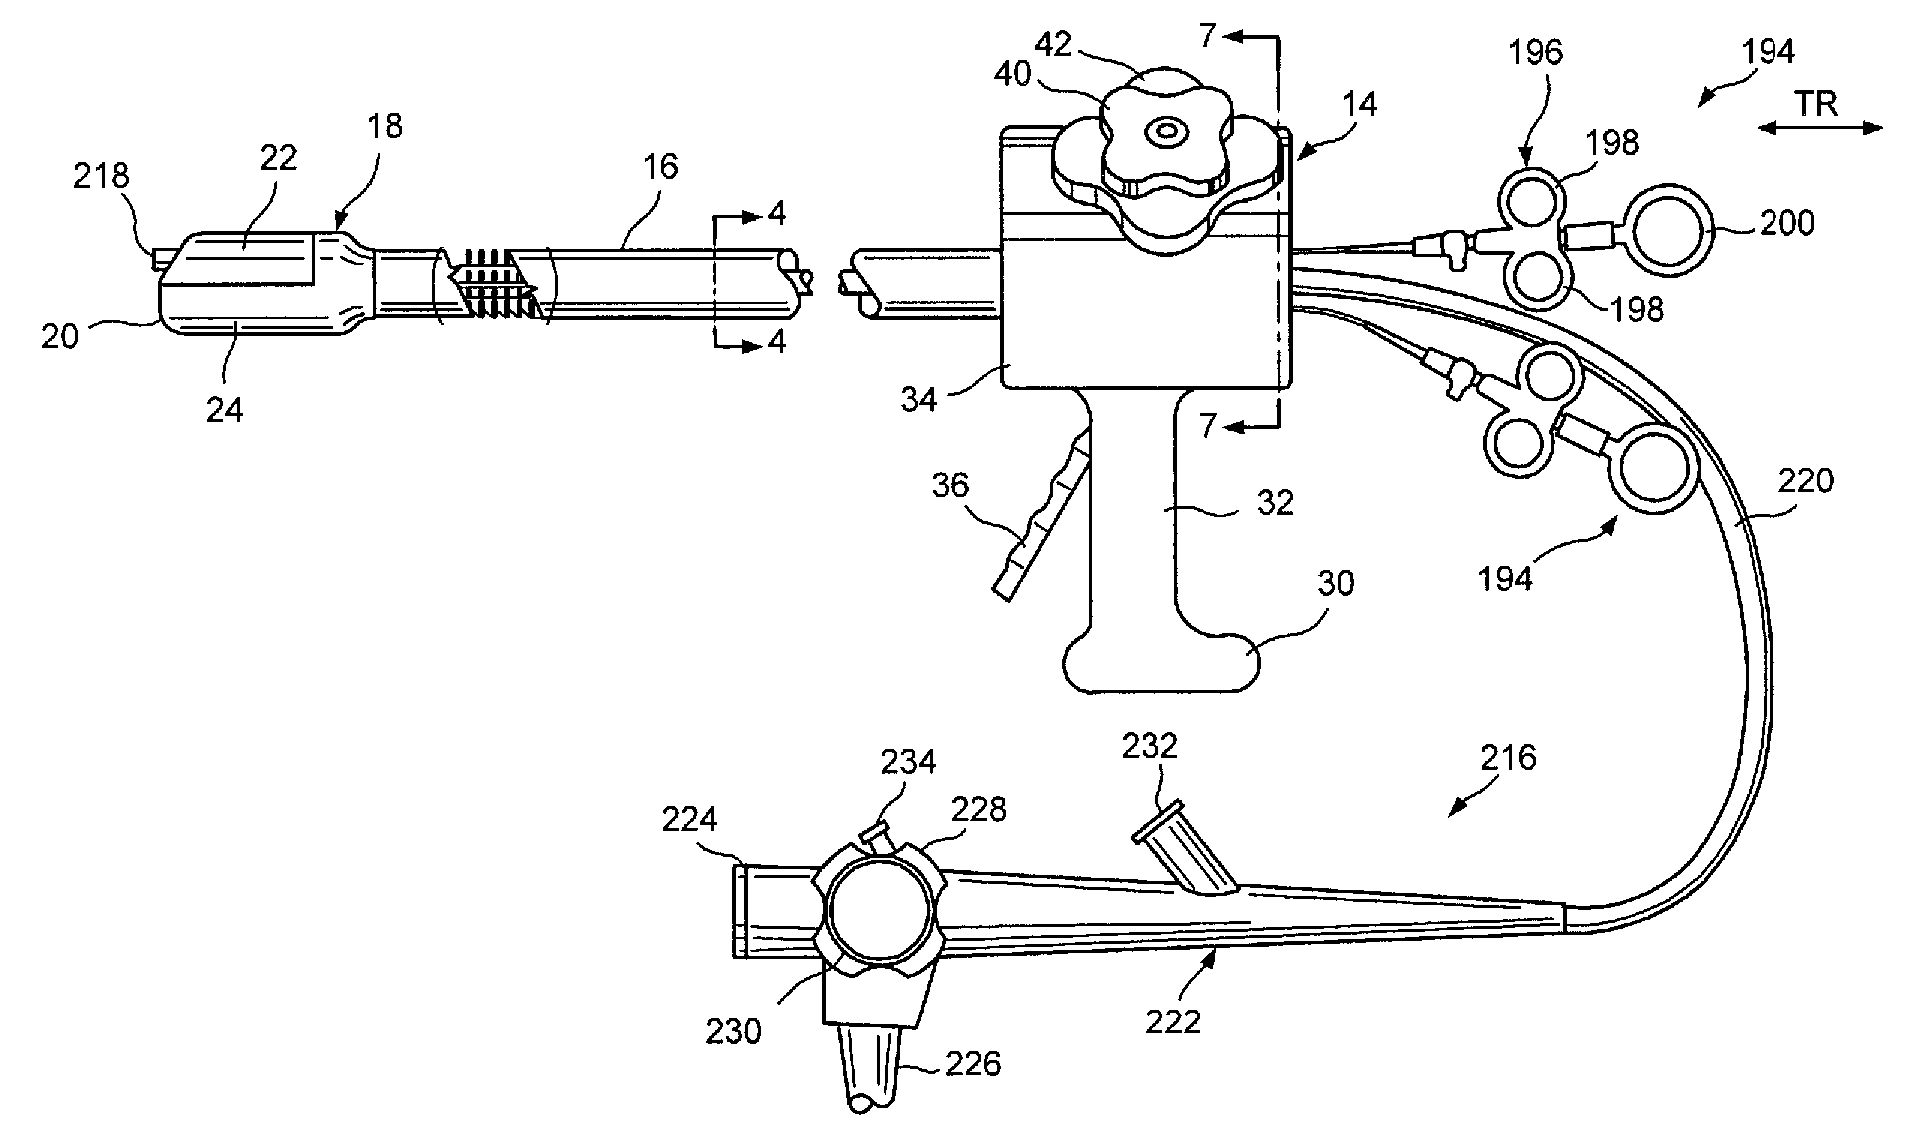 Surgical Apparatus and Method